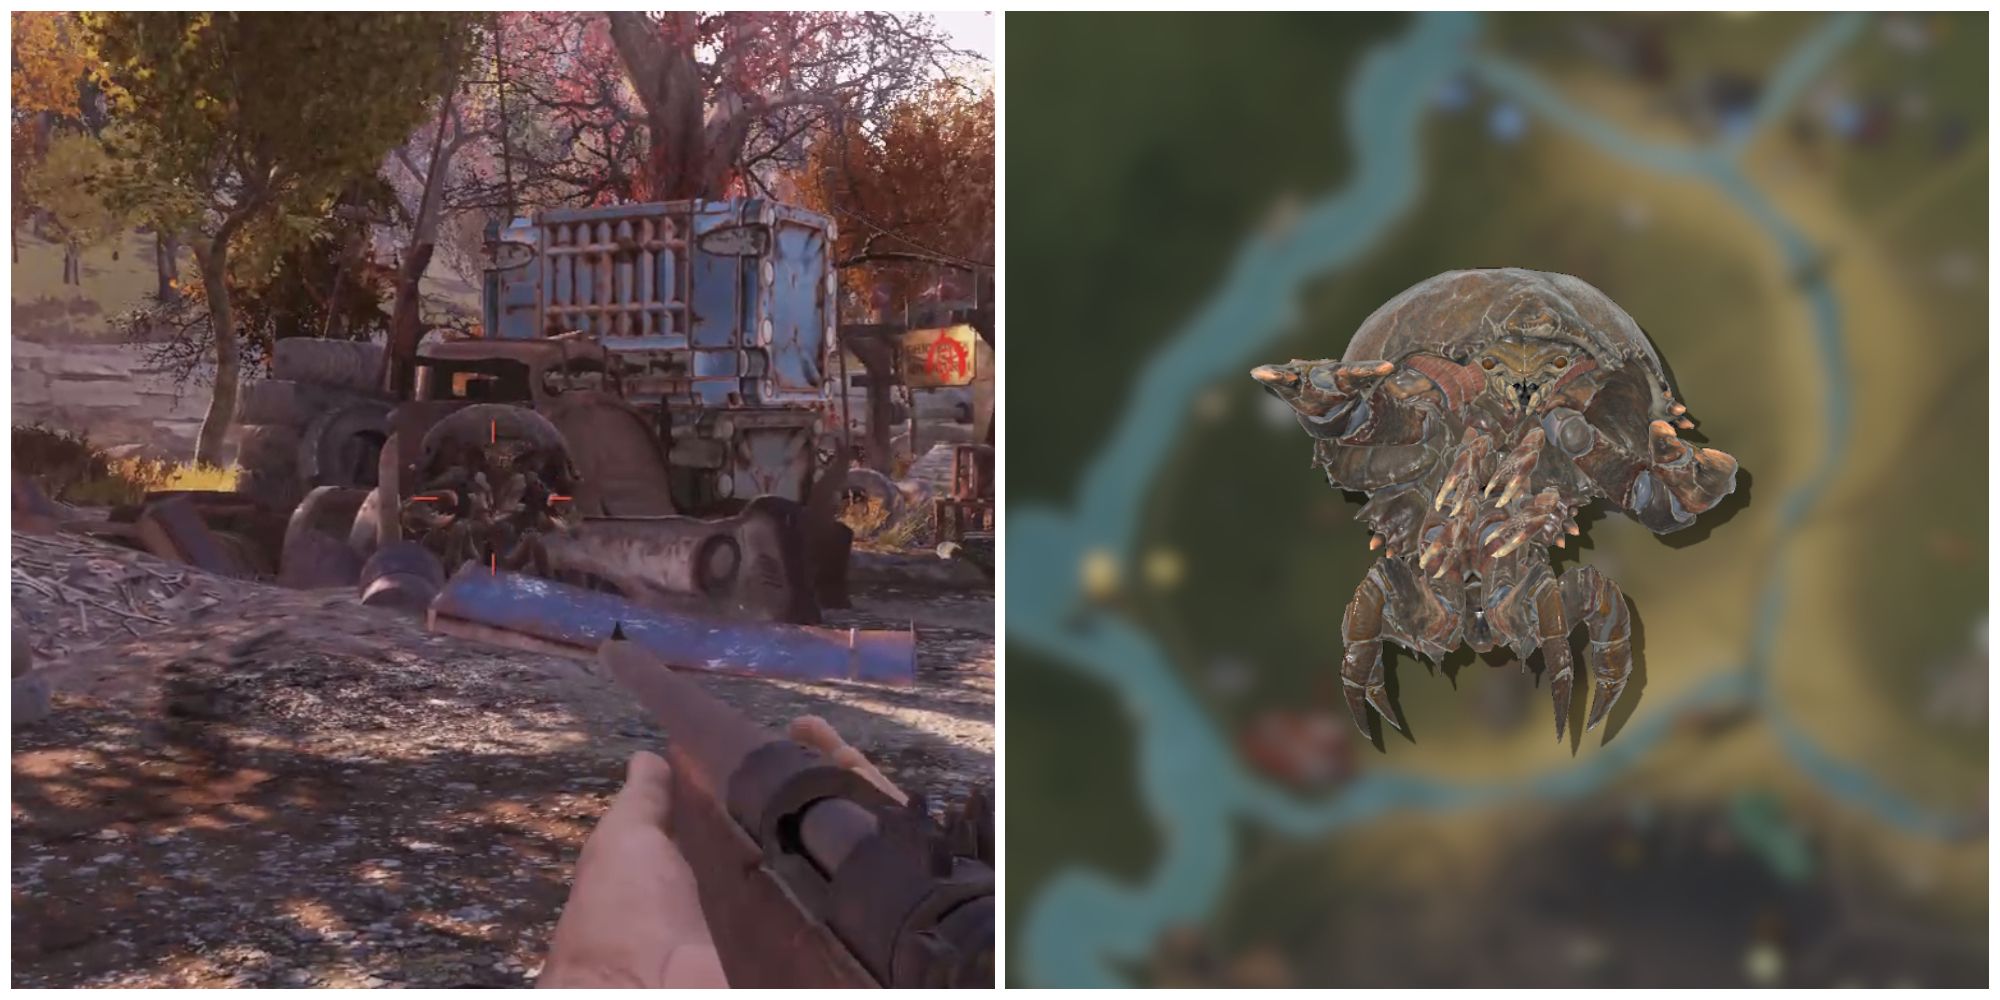 Split image of a Mirelurk in the wild and a Mirelurk in the foreground of a map image from Fallout 76